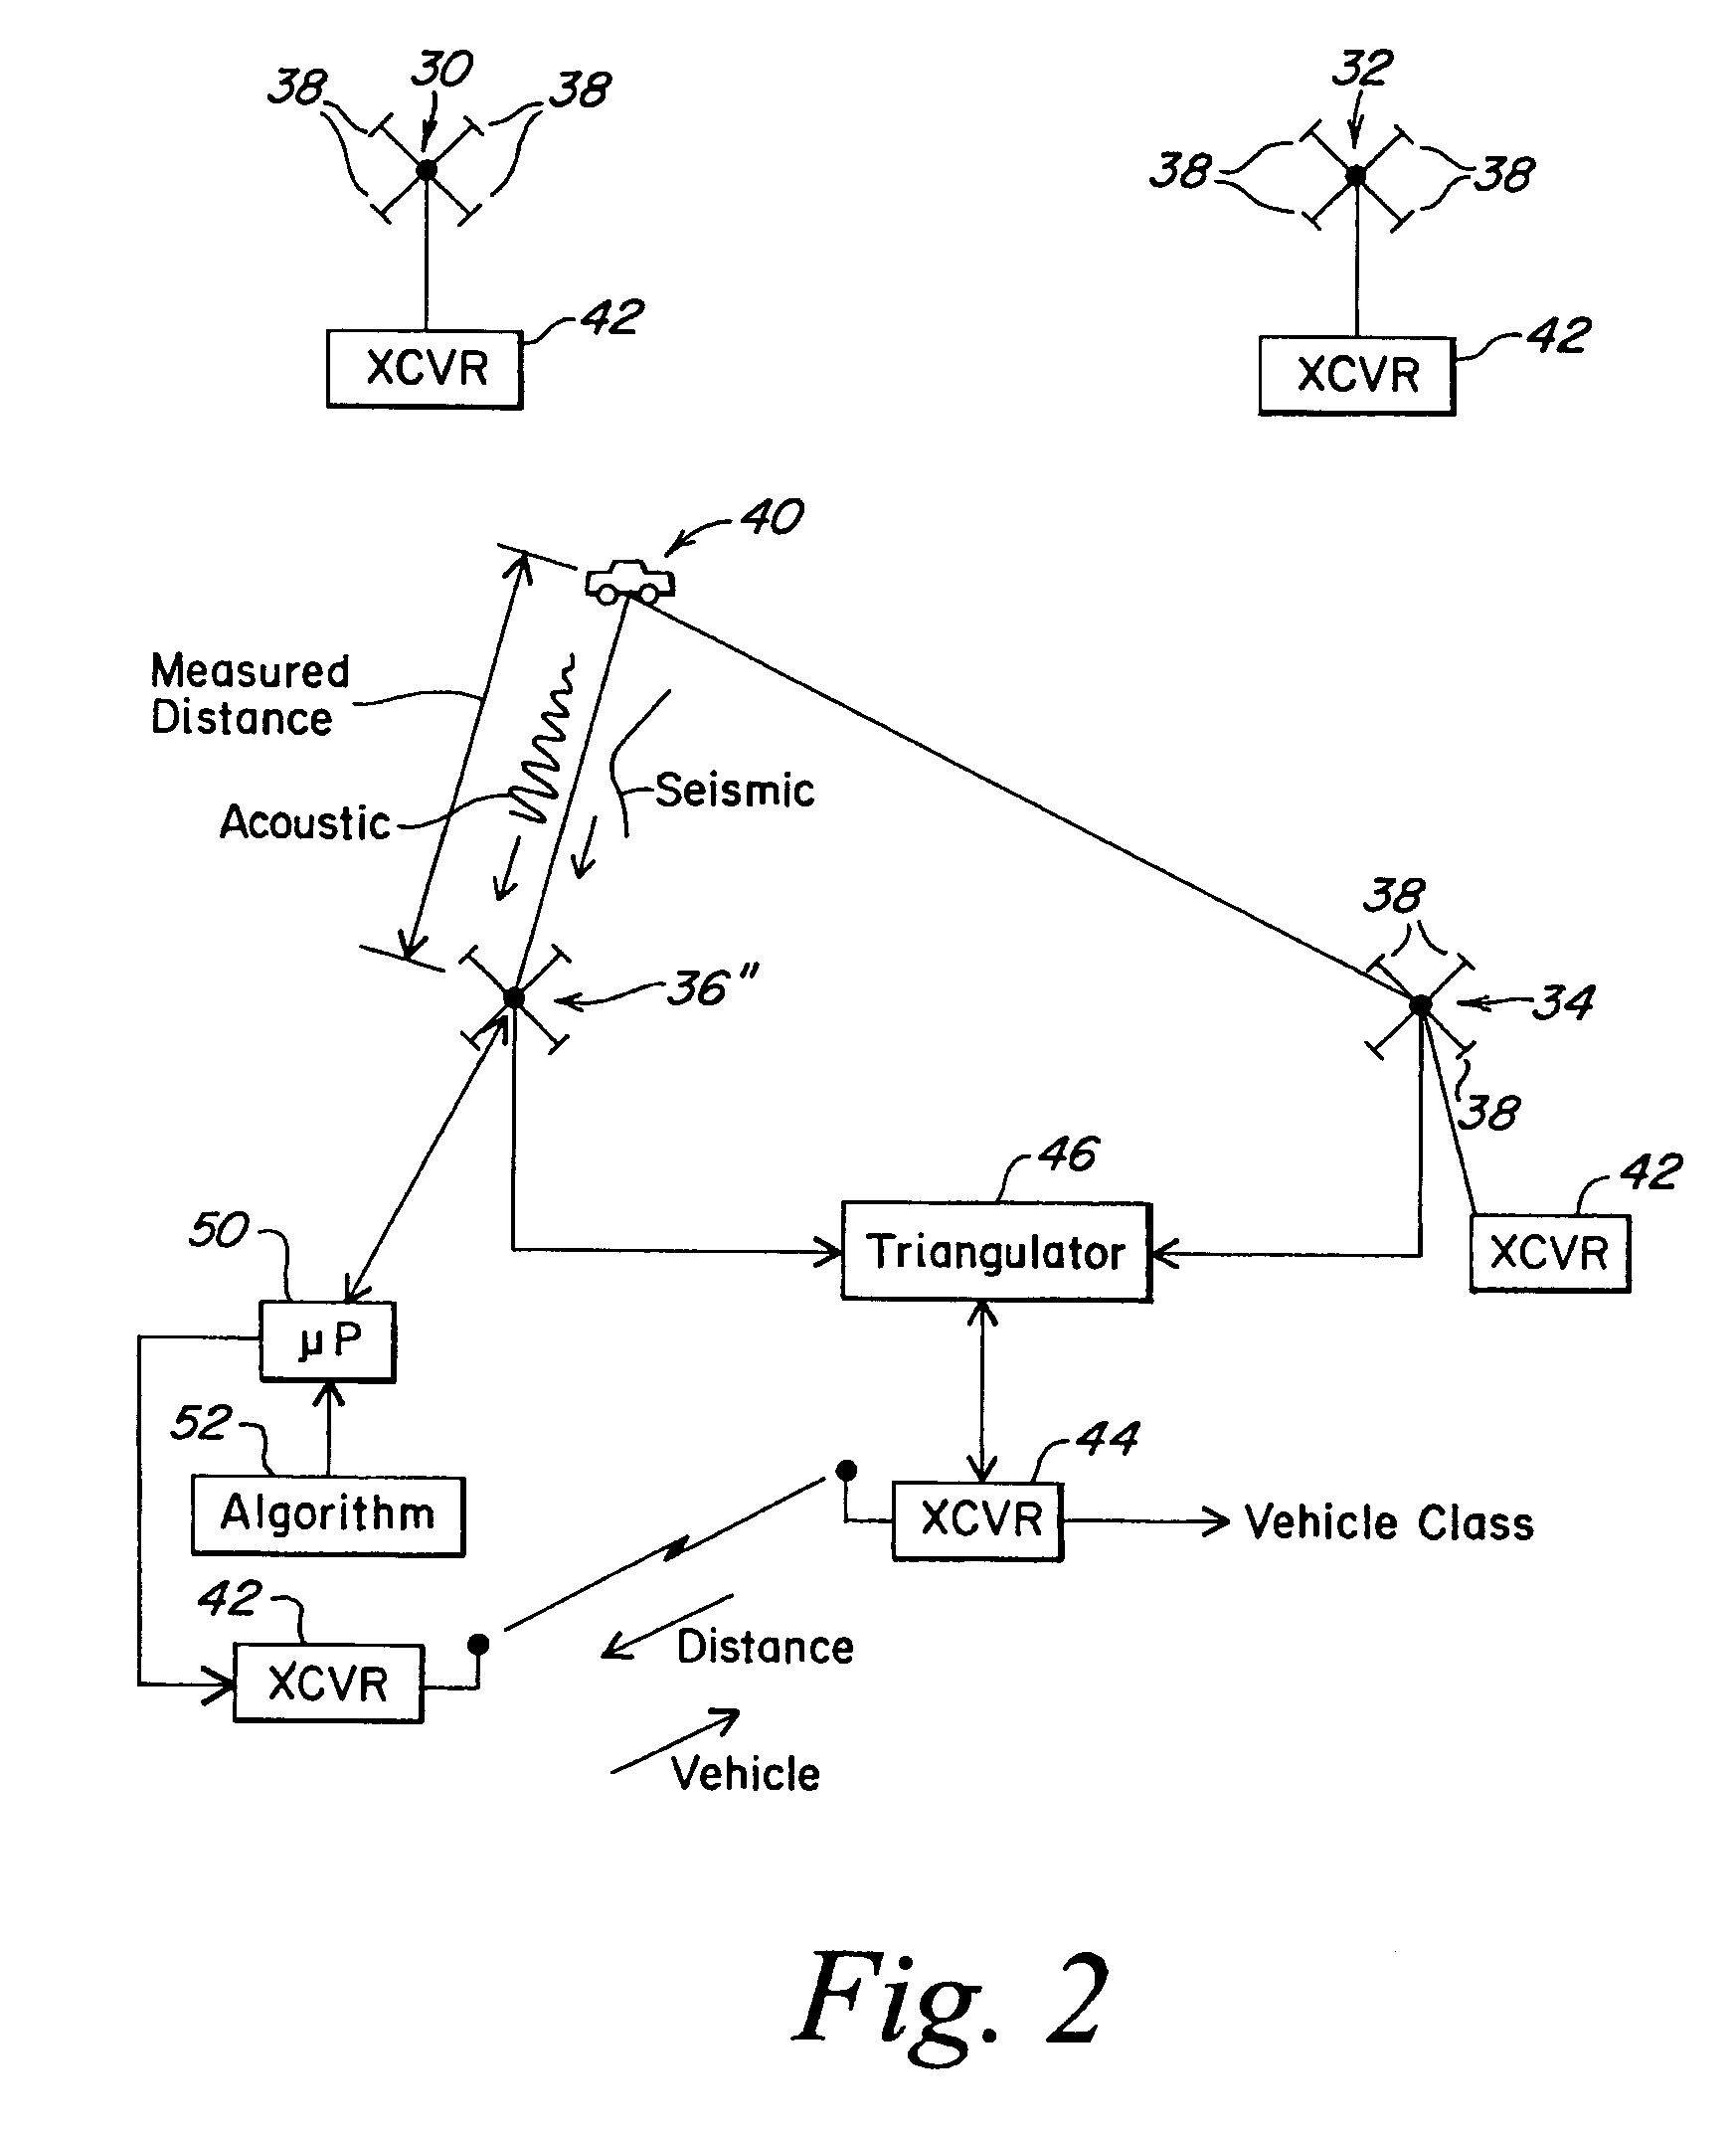 Passive real-time vehicle classification system utilizing unattended ground sensors